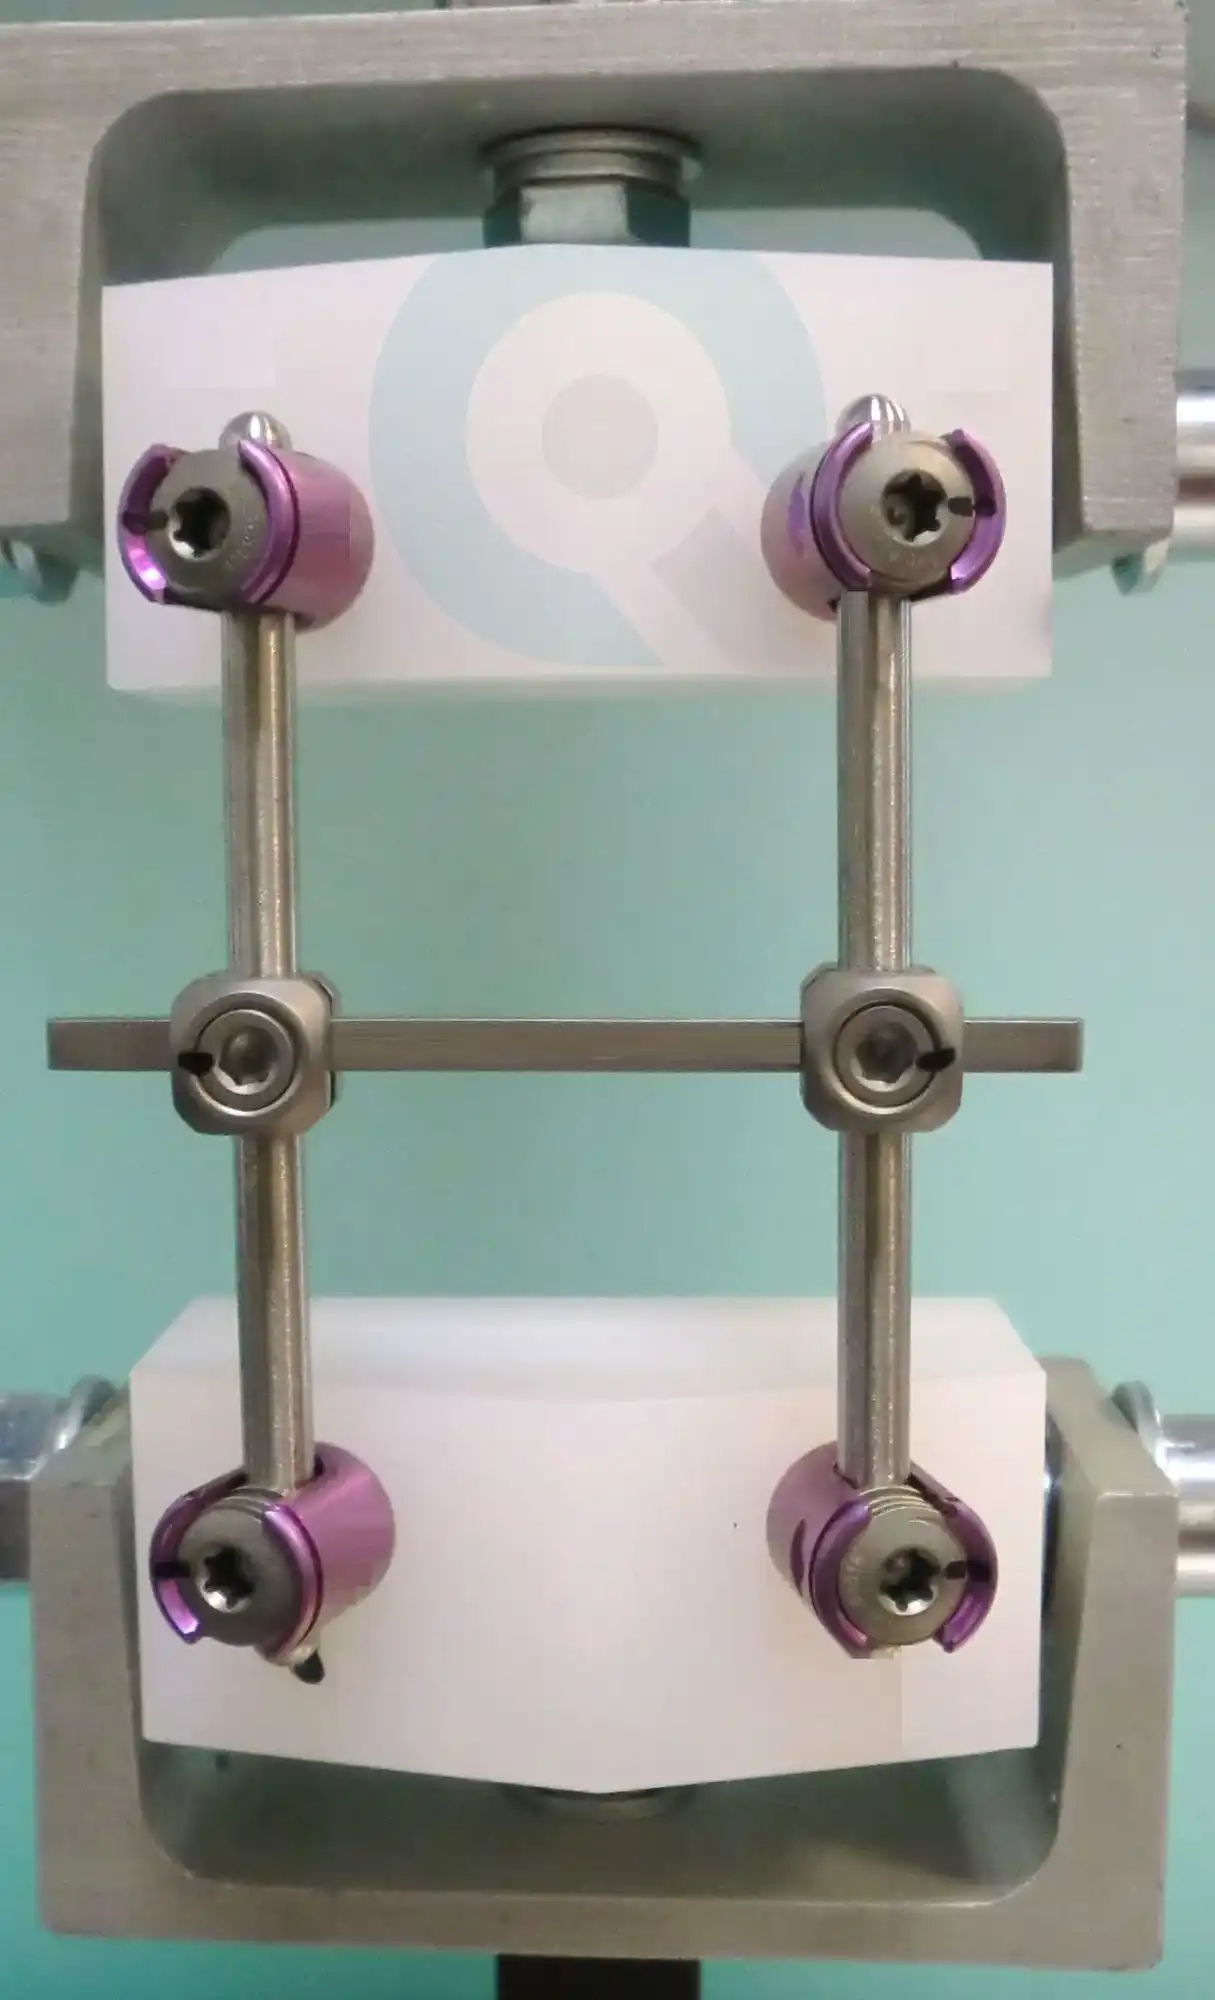 The image shows a test setup for the fatigue testing of spinal implants according to ASTM F1717